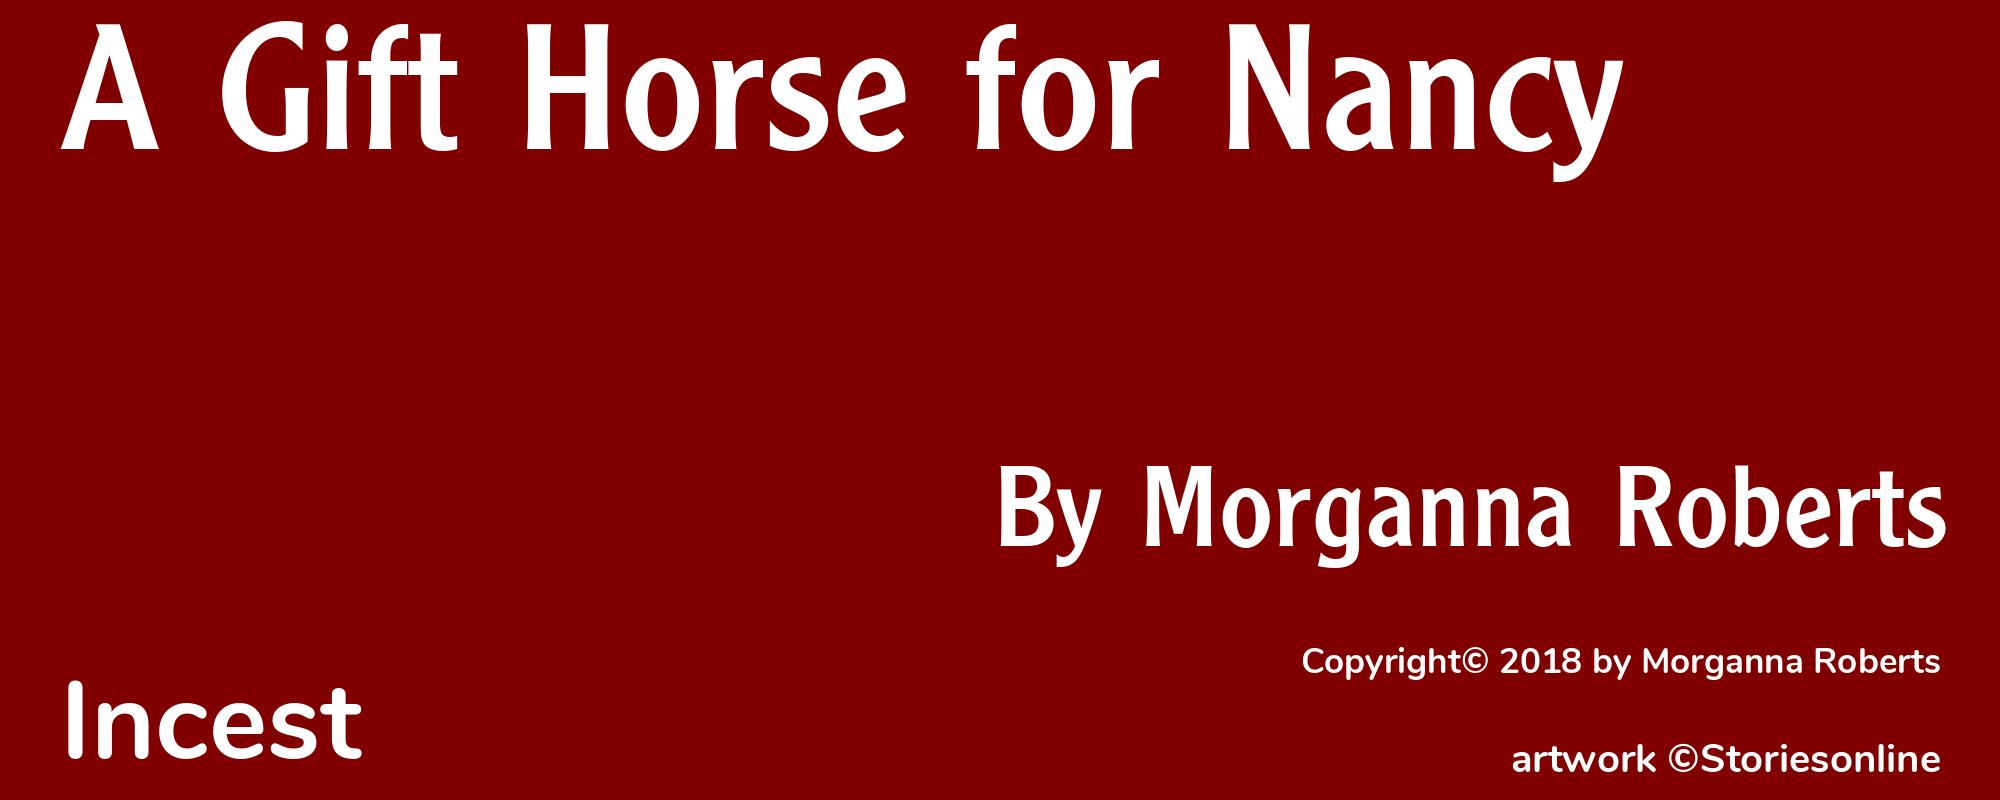 A Gift Horse for Nancy - Cover